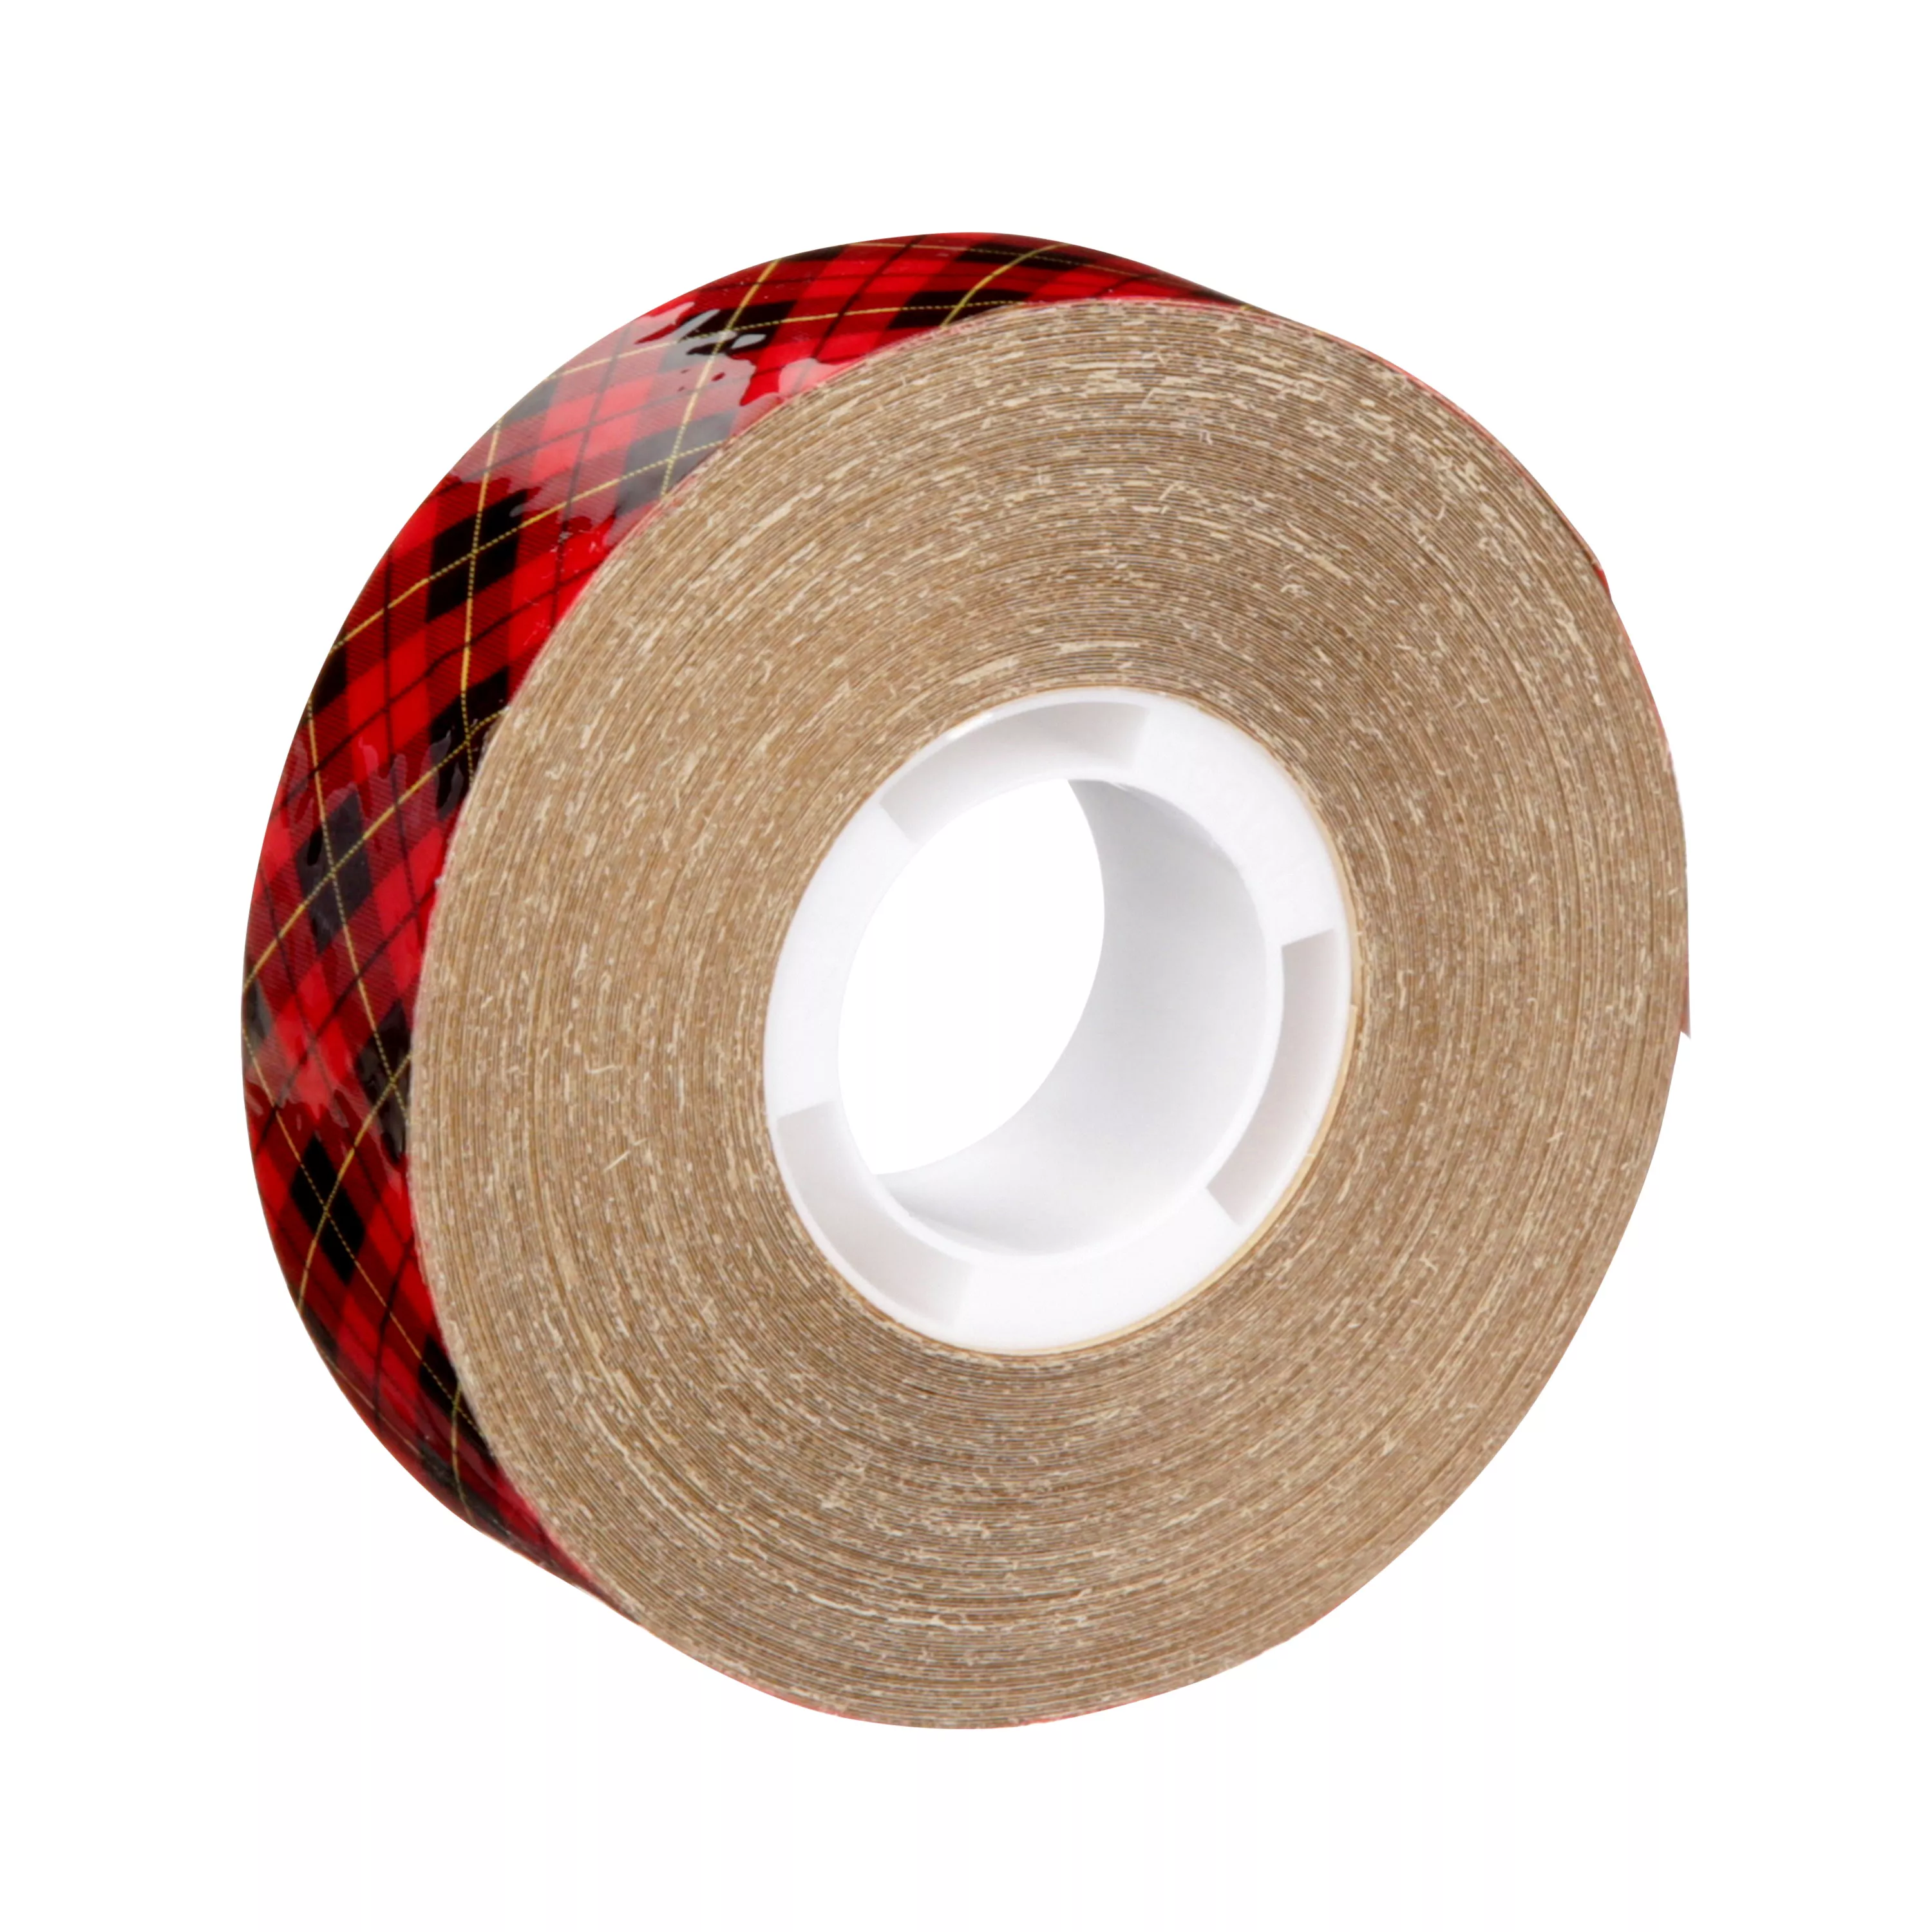 Scotch® ATG Adhesive Transfer Tape 926, Clear, 3/4 in x 18 yd, 5 mil,
(12 Roll/Carton) 48 Roll/Case